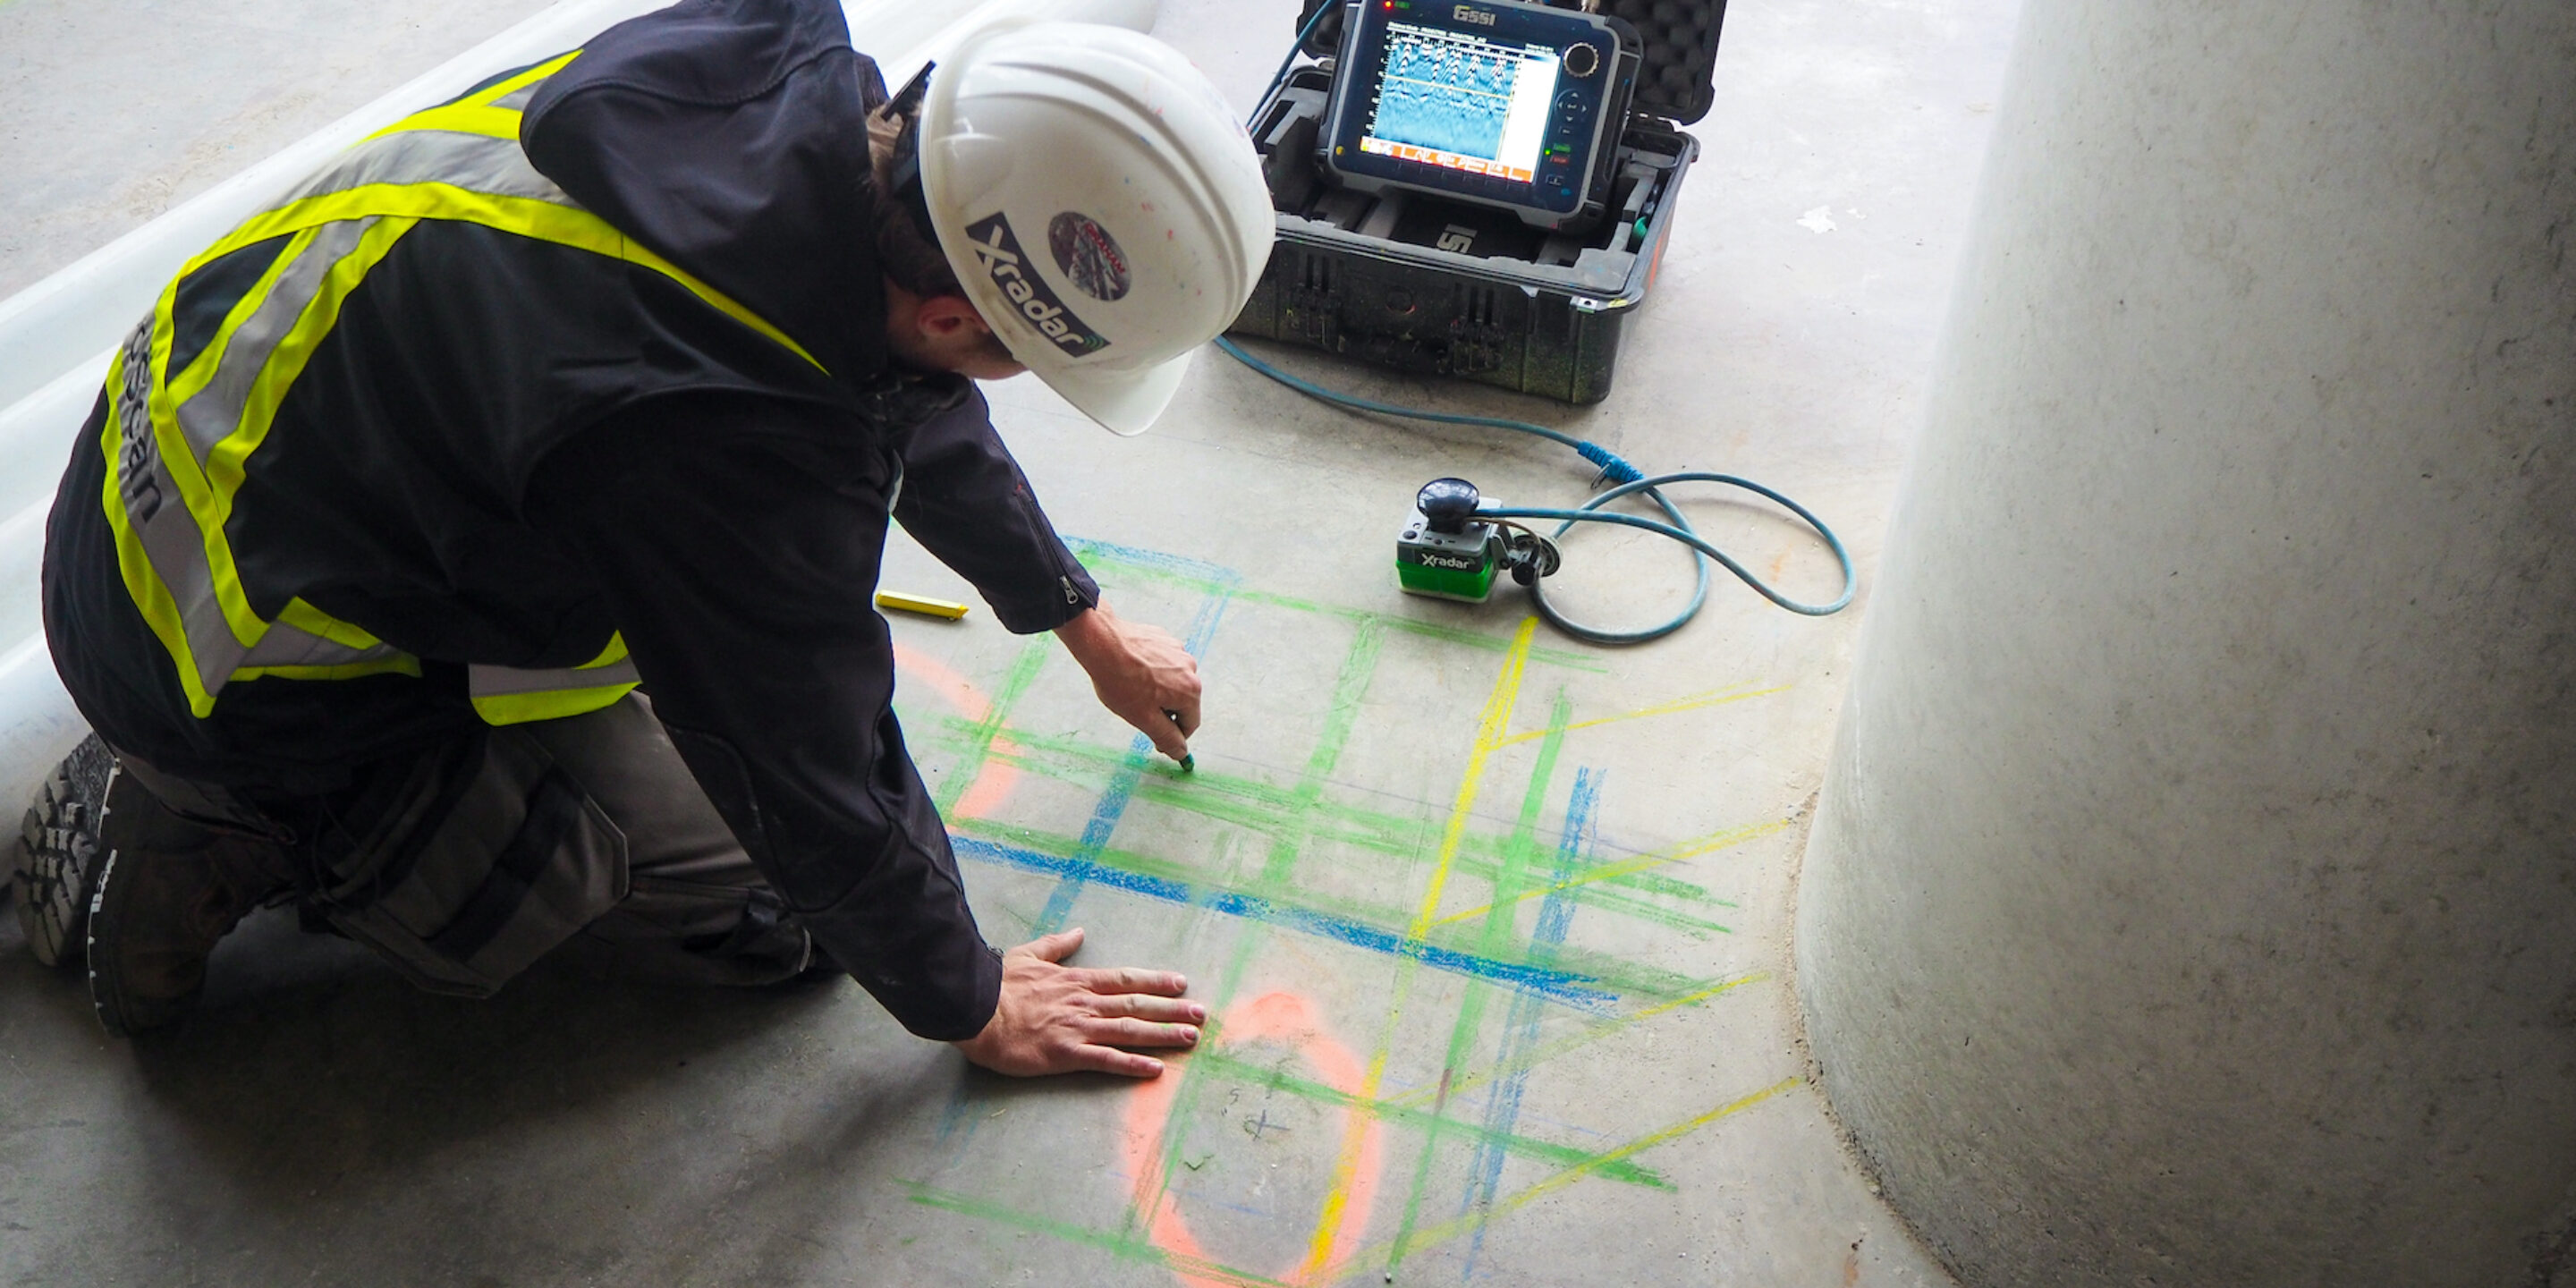 The Xradar Scanning Team use industry leading technology to clearly mark out safest coring locations